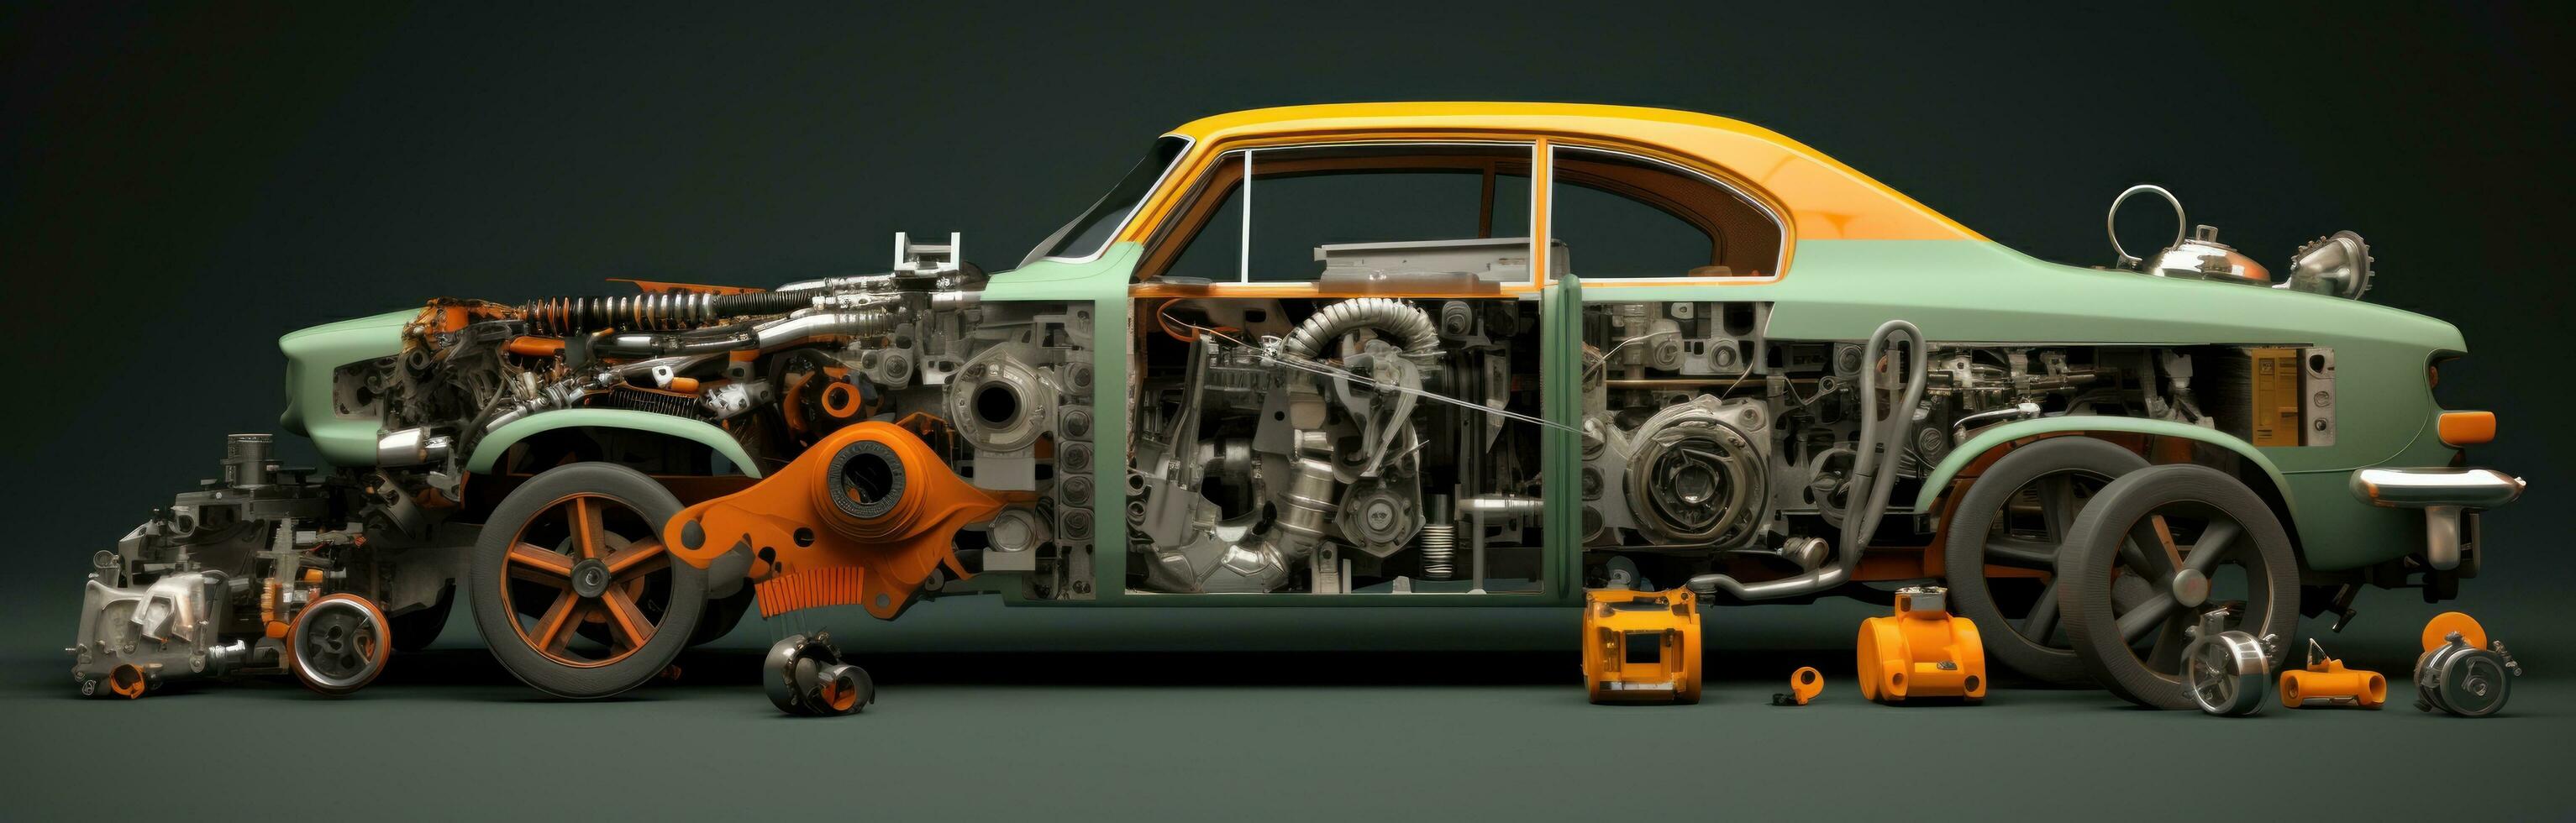 A picture of a car with various parts photo